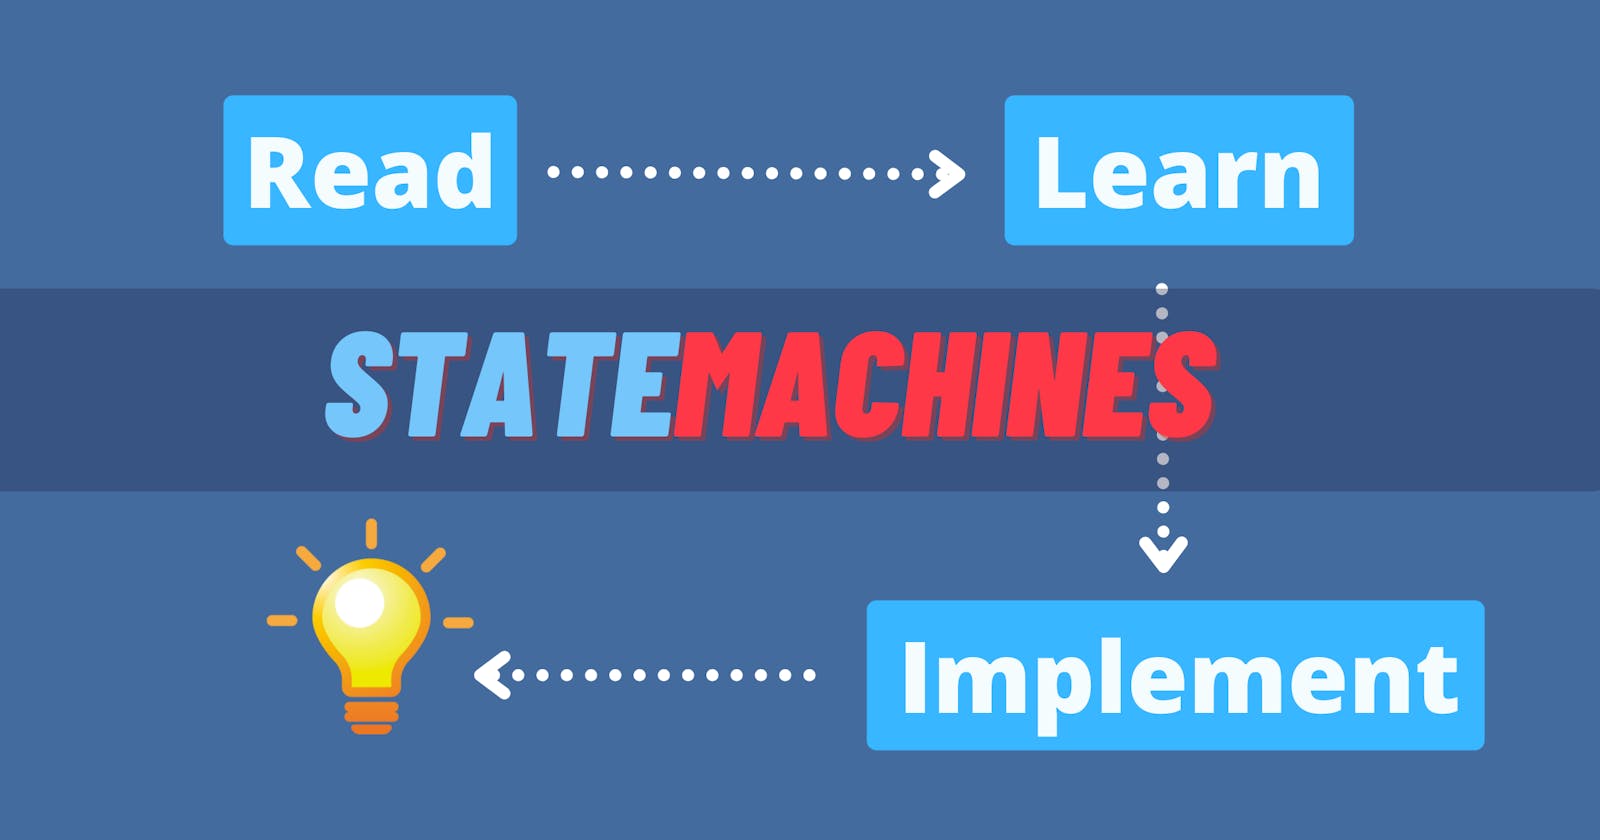 State Machines for JavaScript Developers - How to Use Them in Your Apps